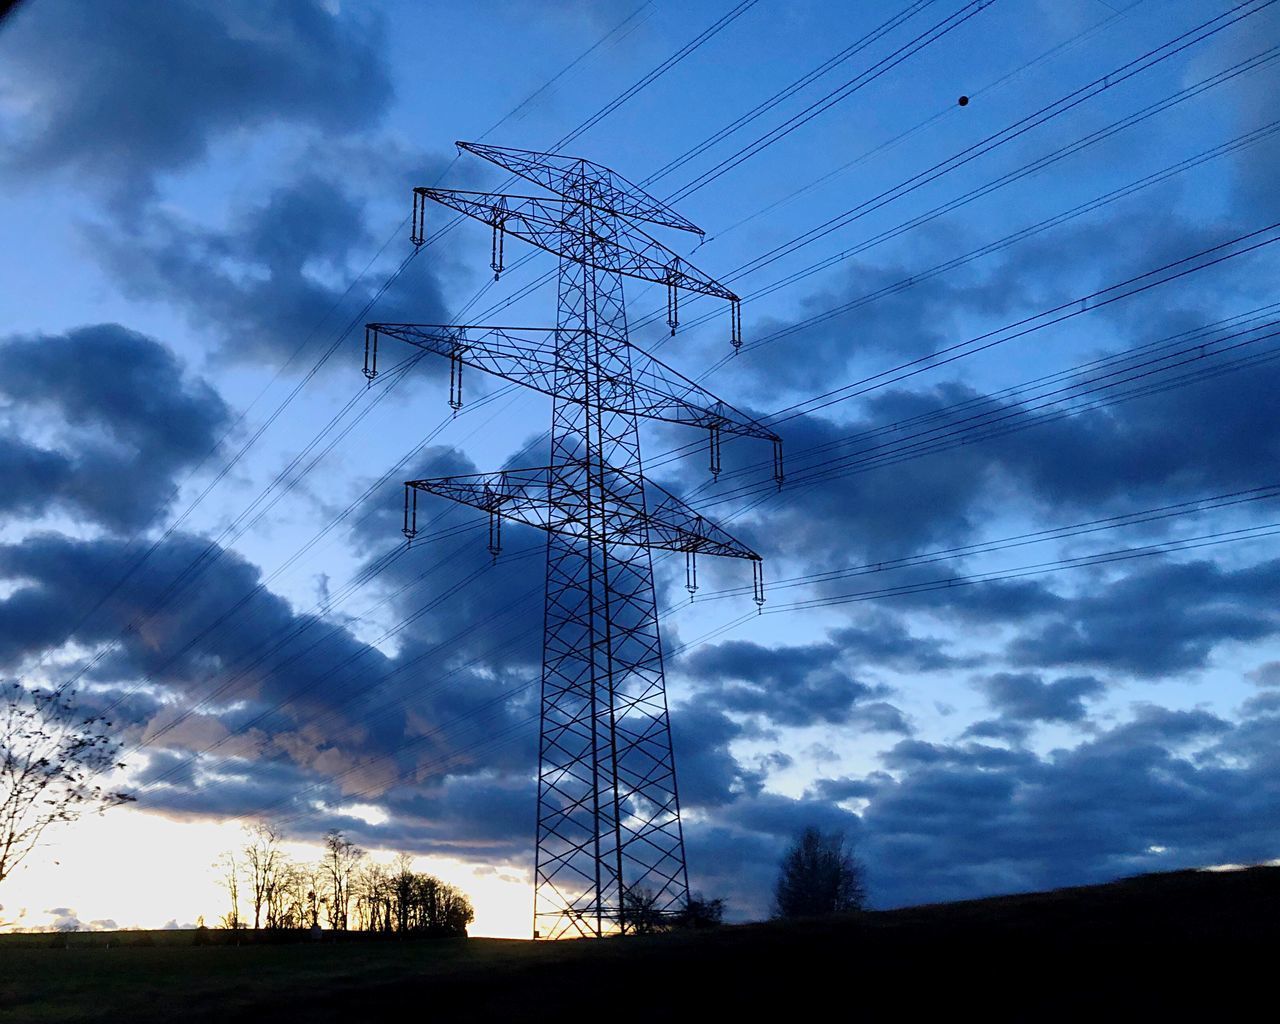 LOW ANGLE VIEW OF SILHOUETTE ELECTRICITY PYLON AGAINST SKY AT DUSK